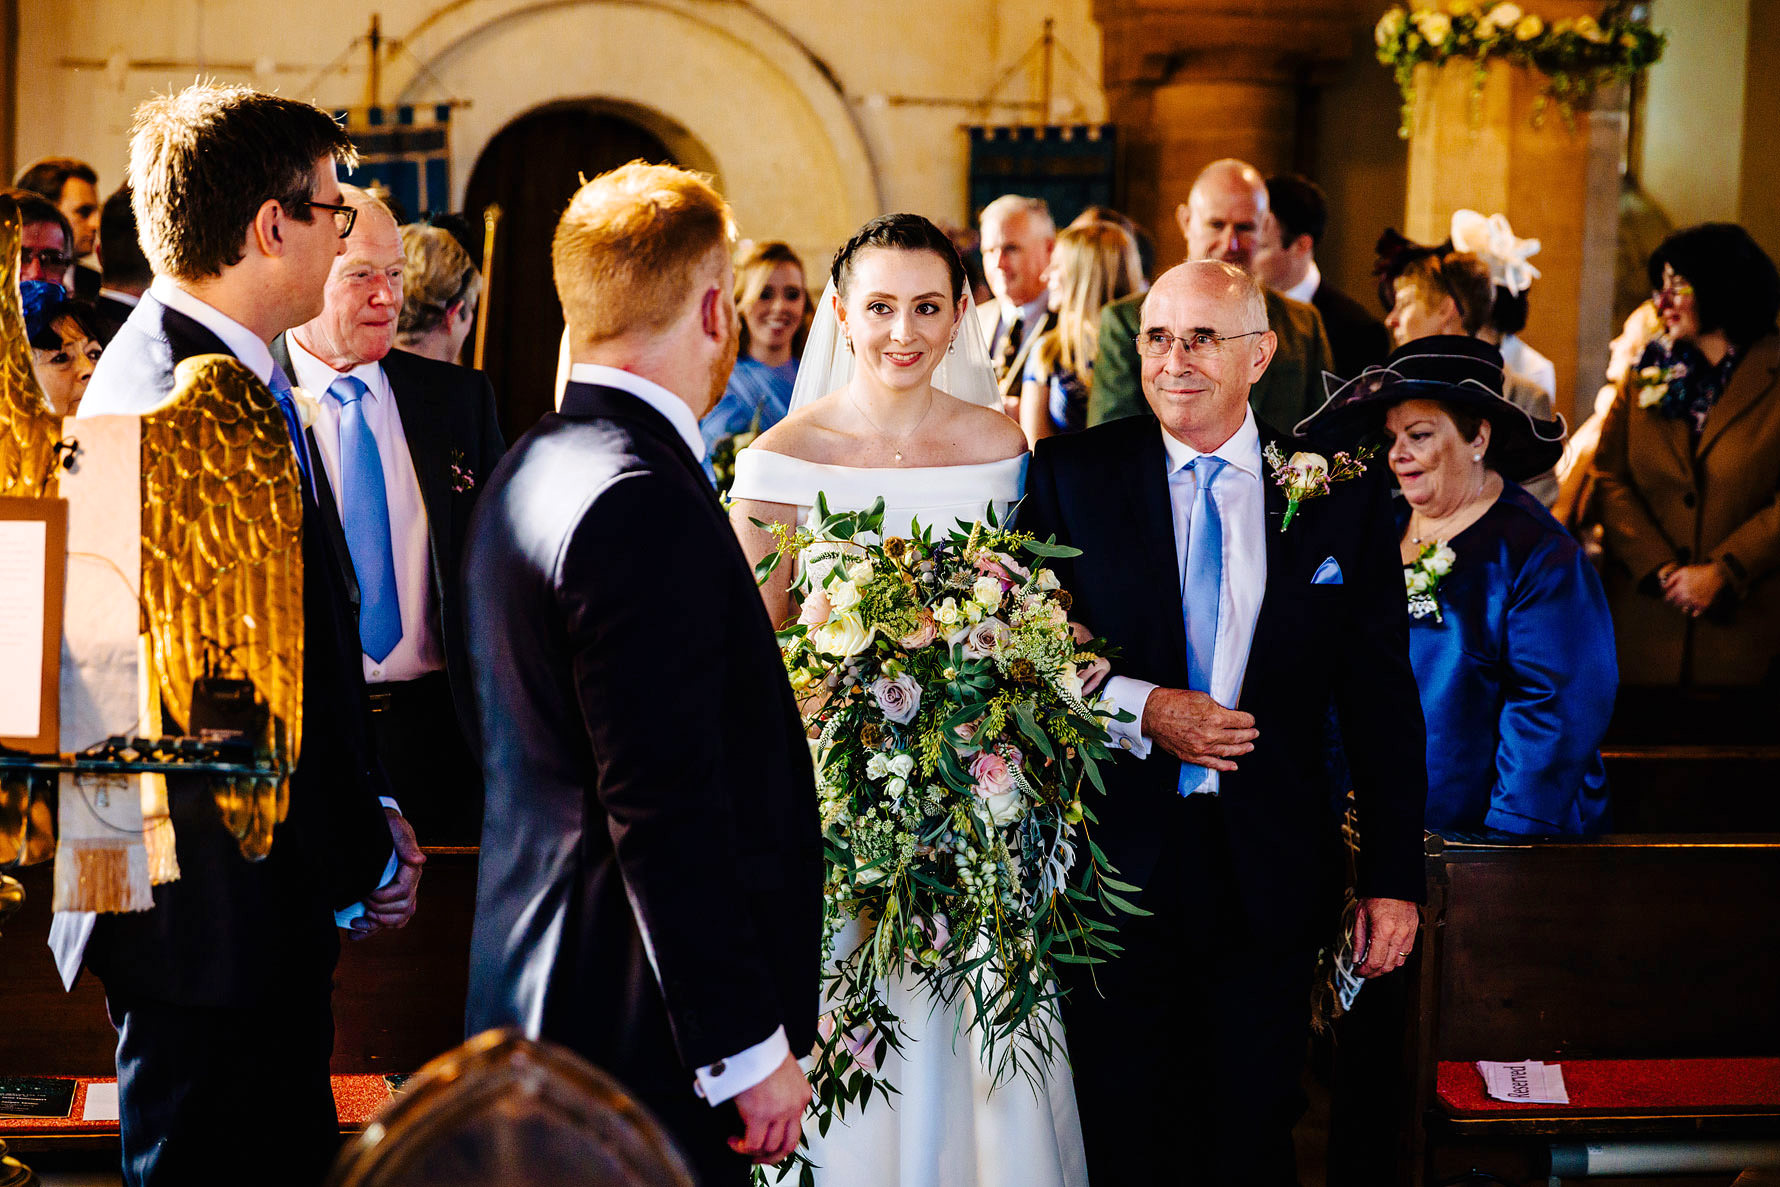 hothorpe hall woodlands wedding photography by Elliot W Patching